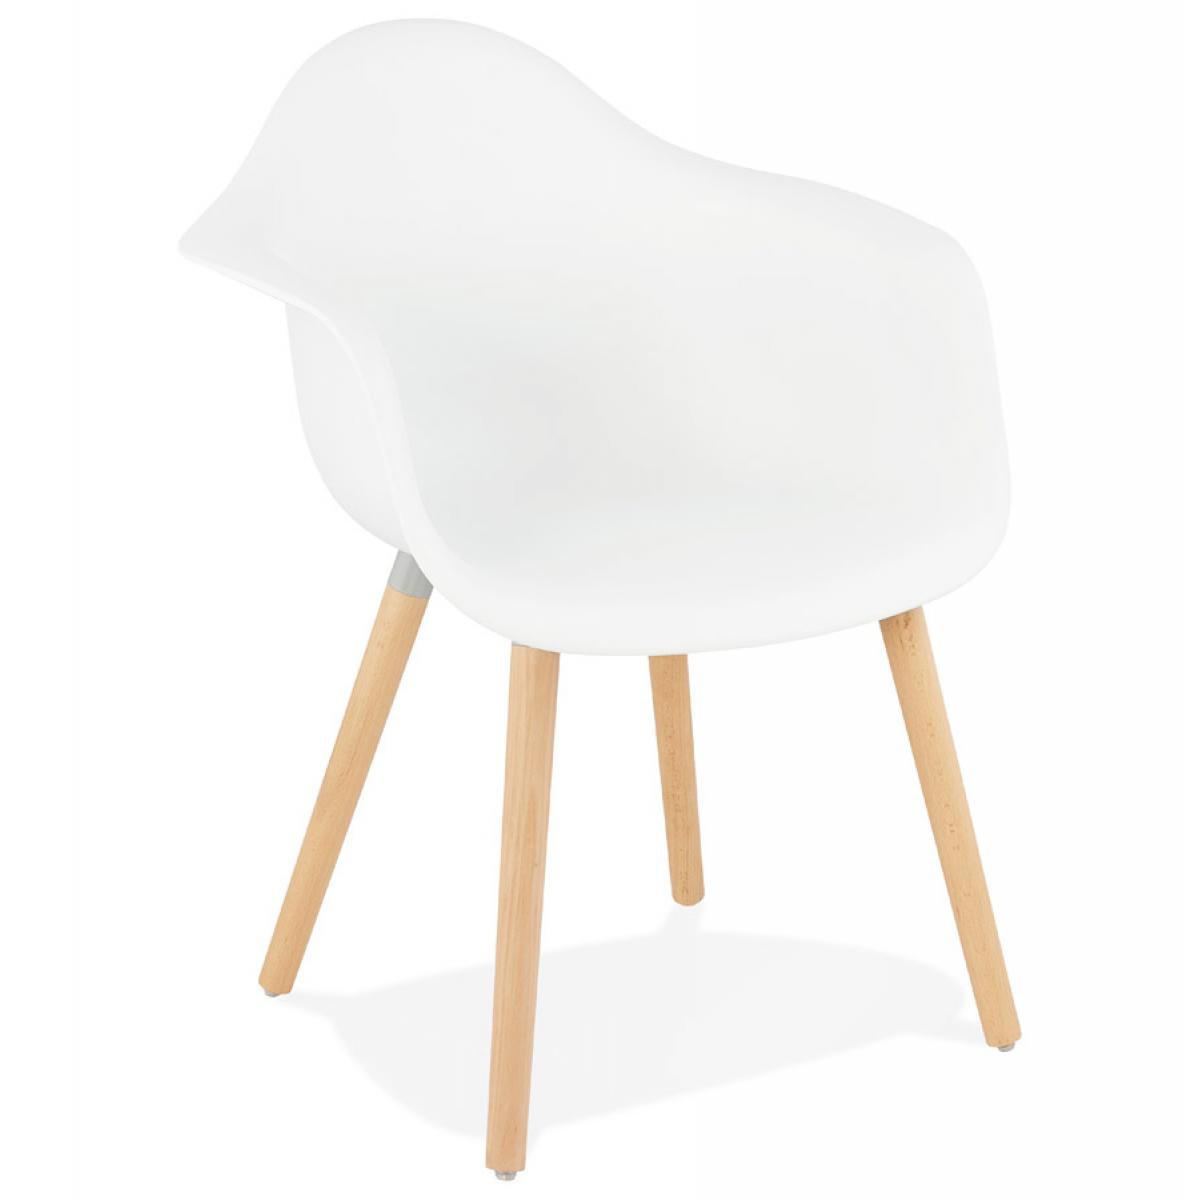 Alterego - Chaise avec accoudoirs 'OLIVIA' blanche style scandinave - Chaises